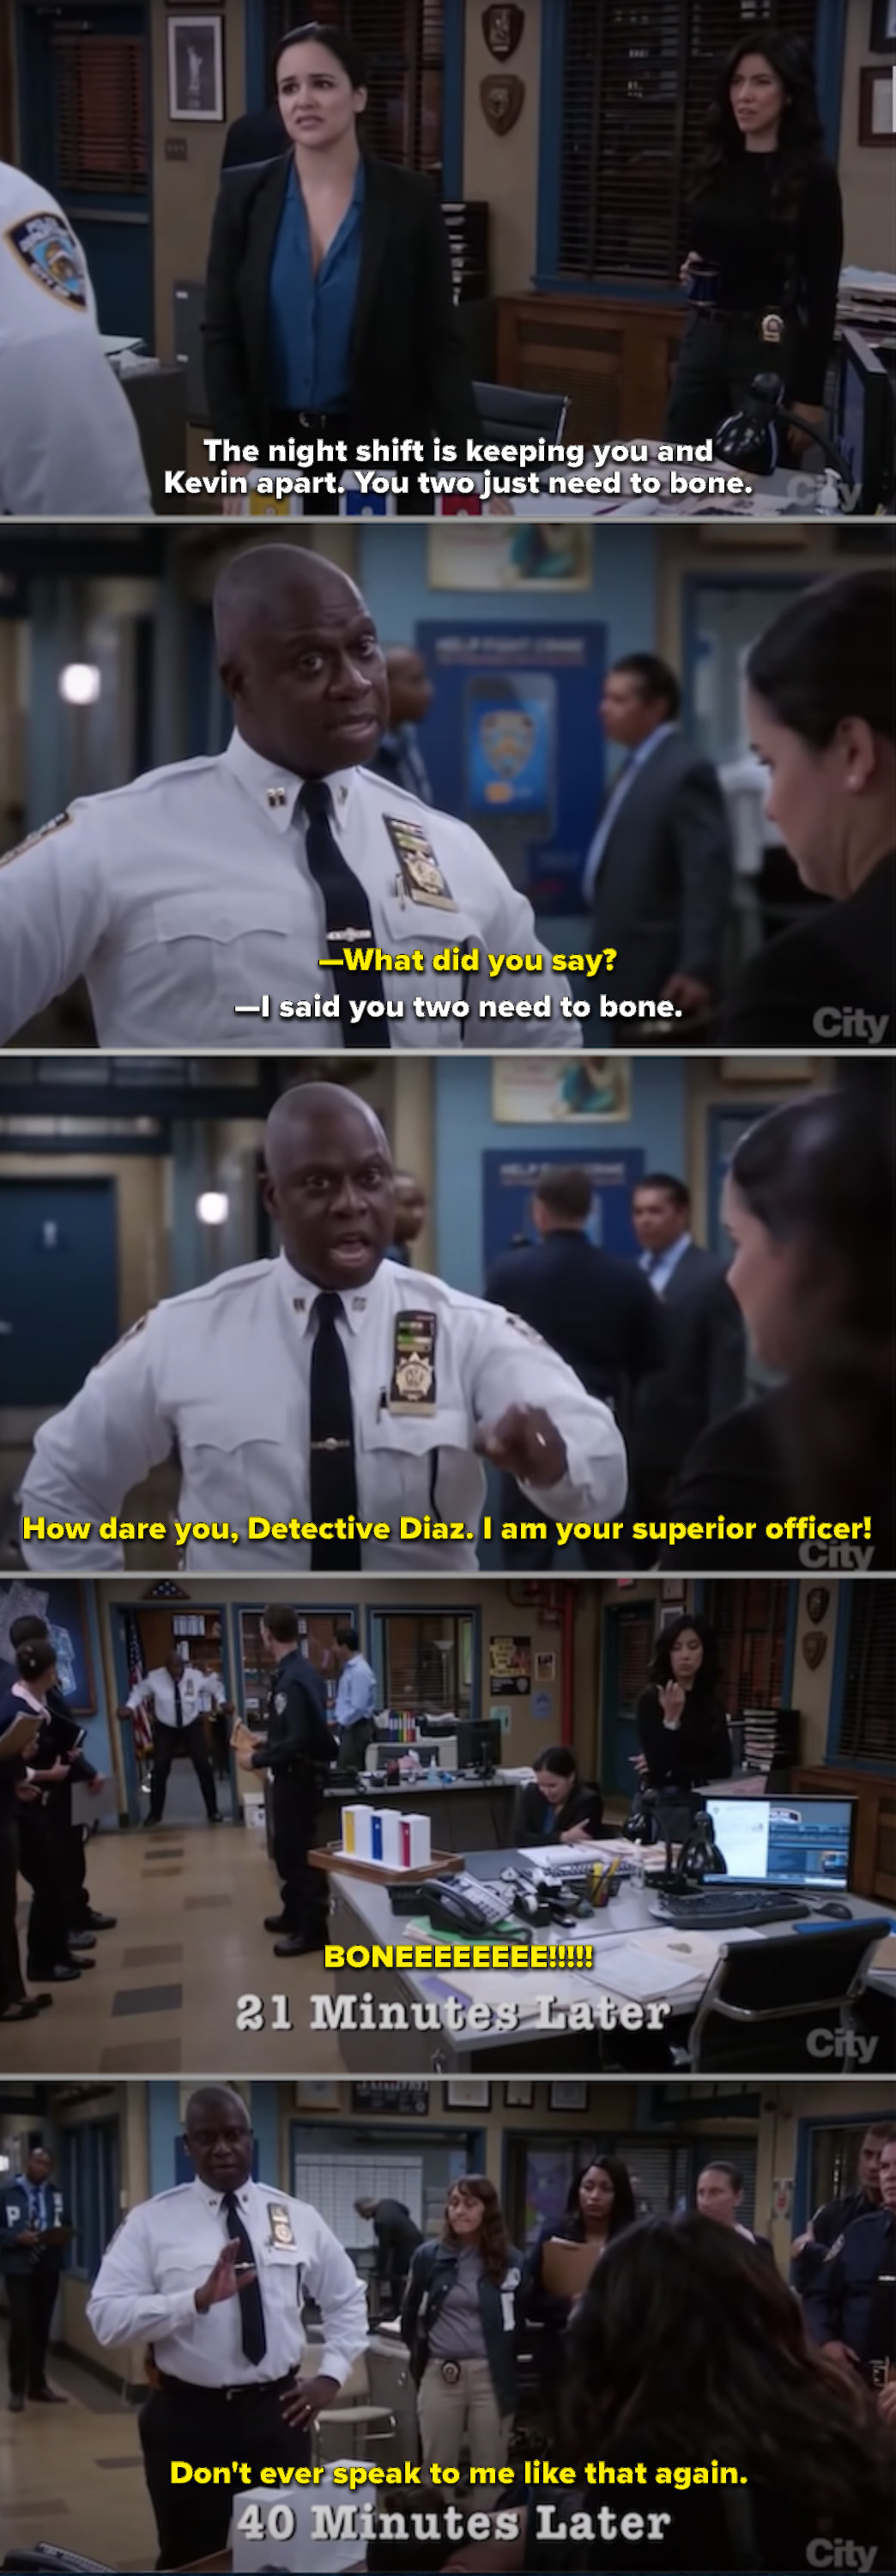 Captain Holt yelling in the police precinct